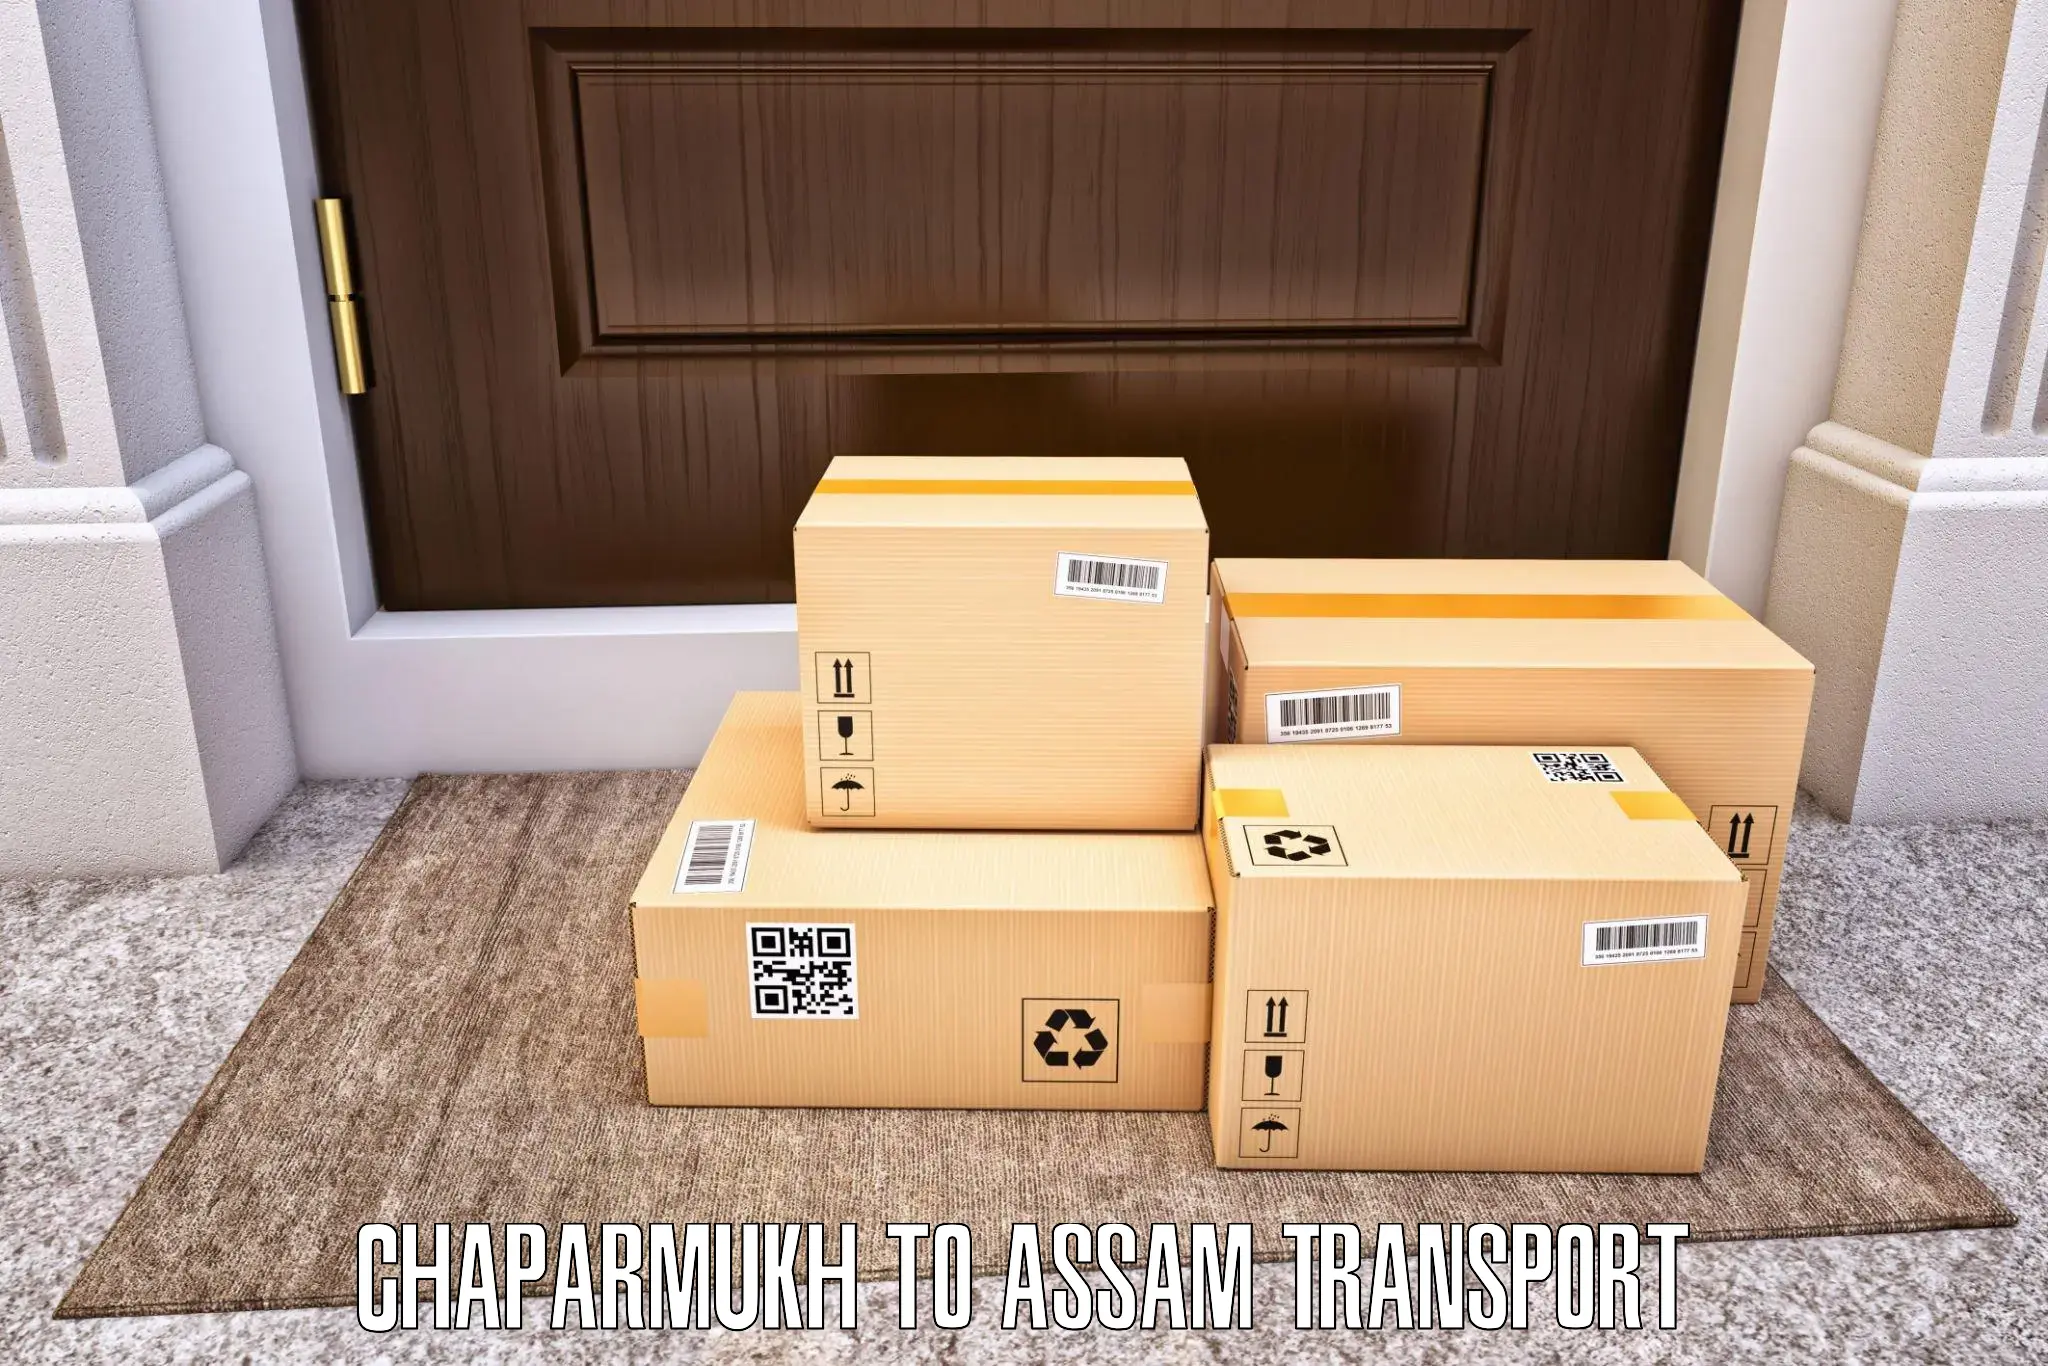 Vehicle transport services Chaparmukh to Nazira